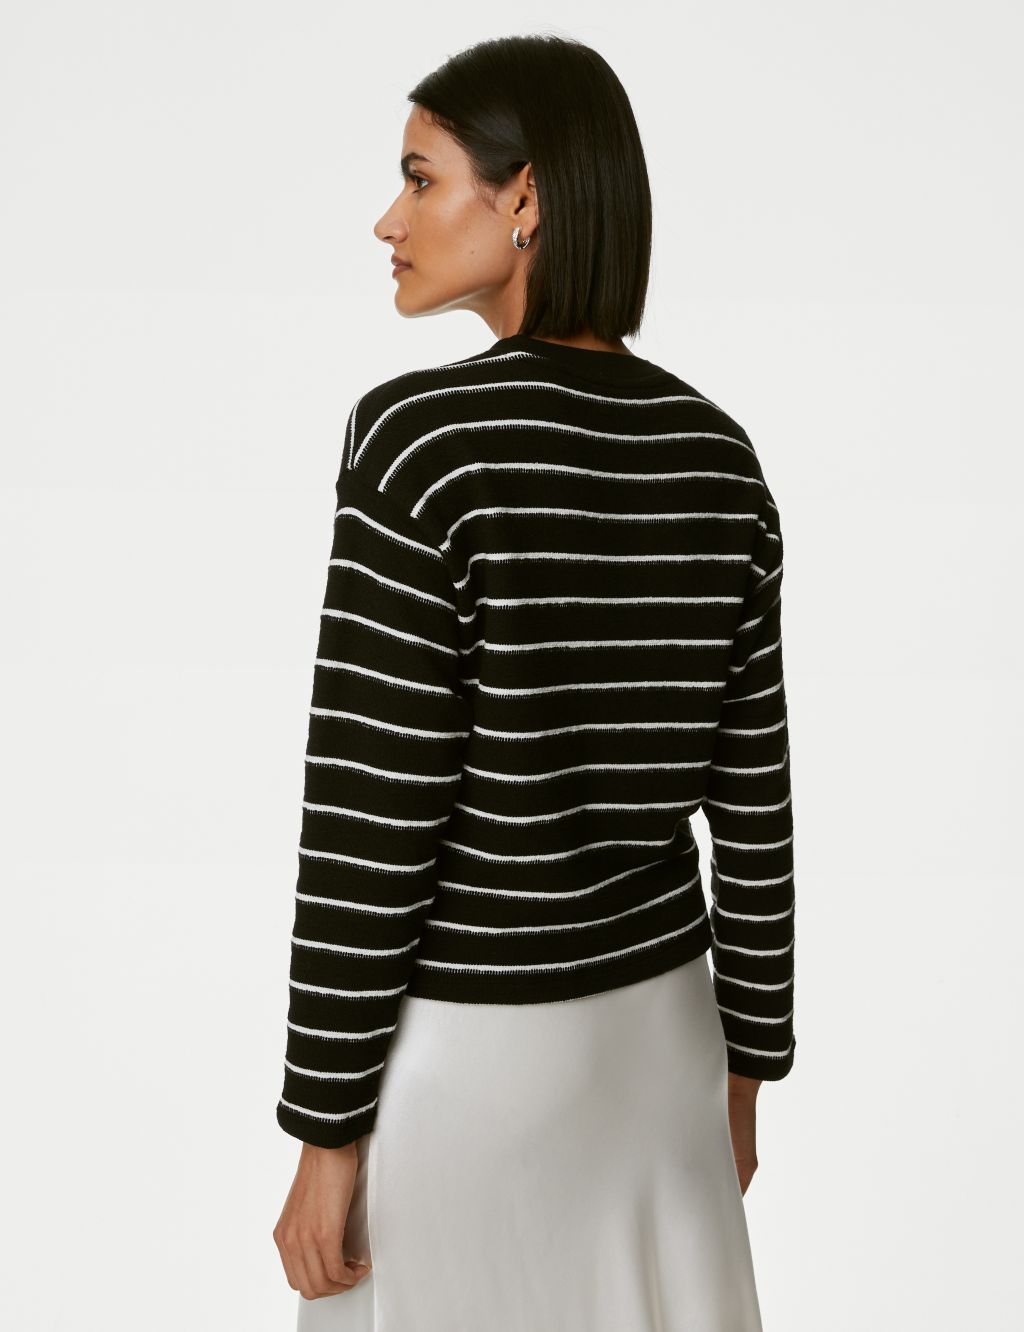 Cotton Rich Textured Striped Top image 5